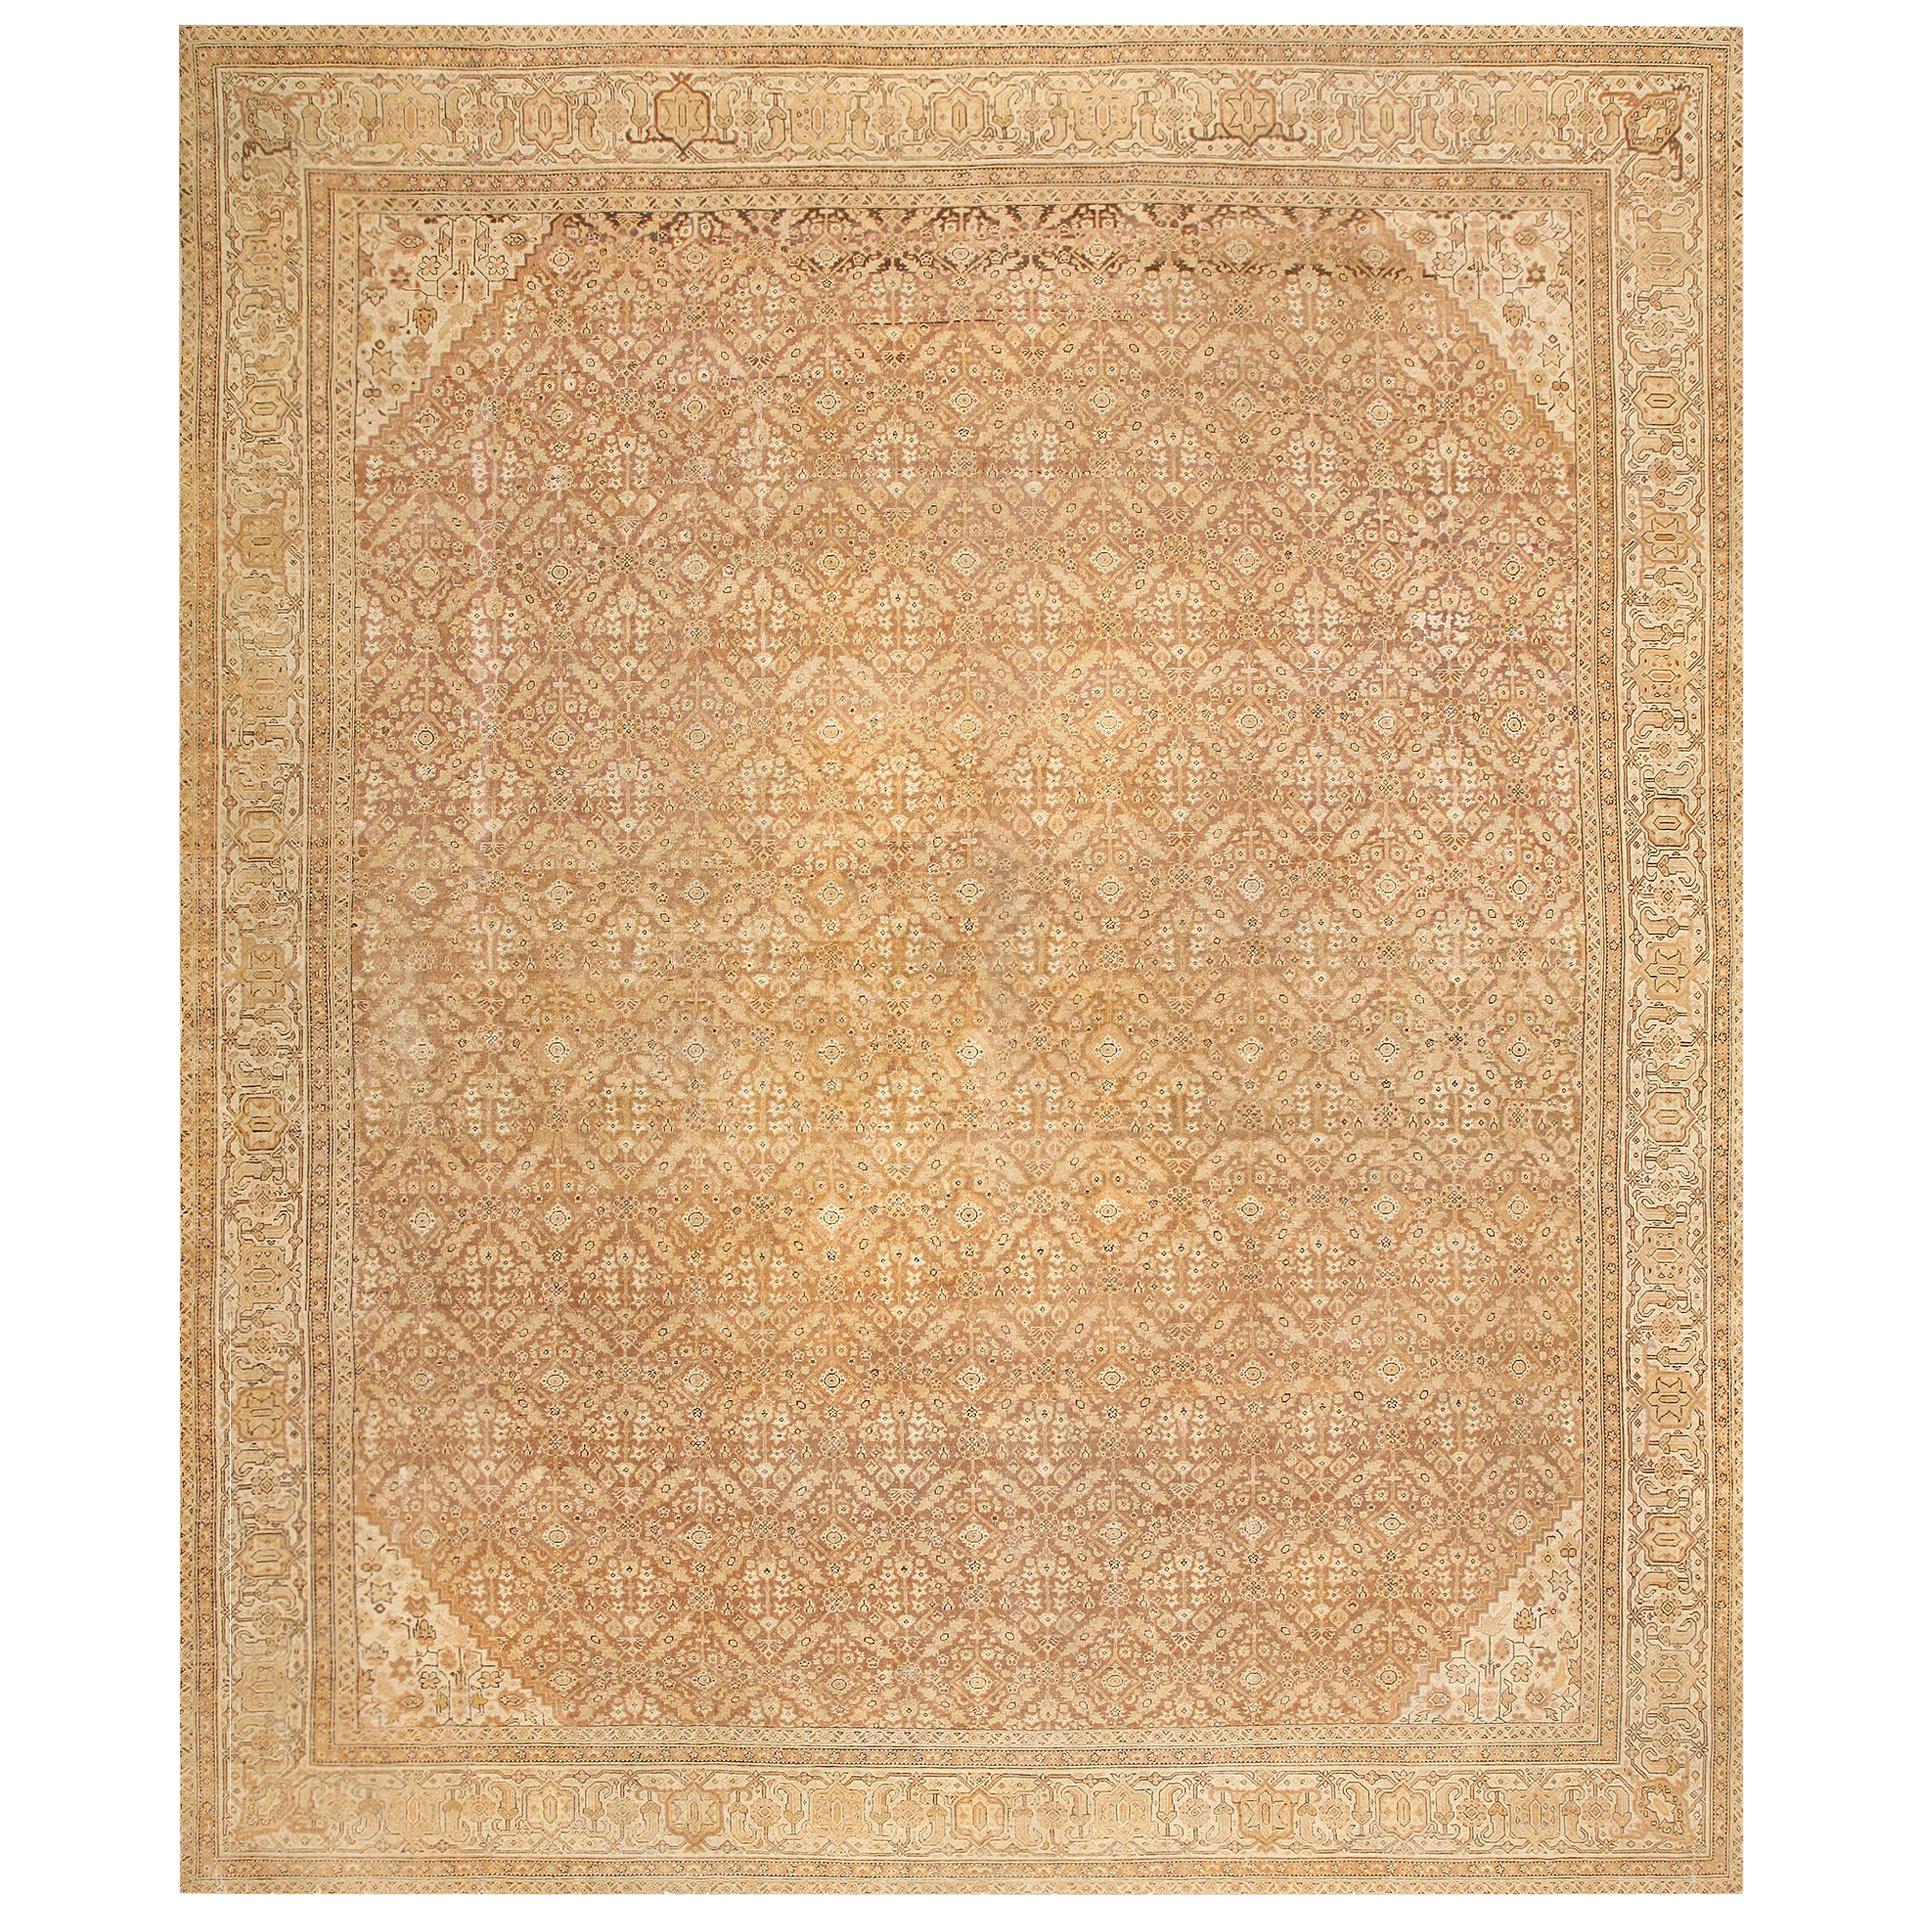 Antique Indian Amritsar Rug. Size: 12 ft 6 in x 14 ft 10 in